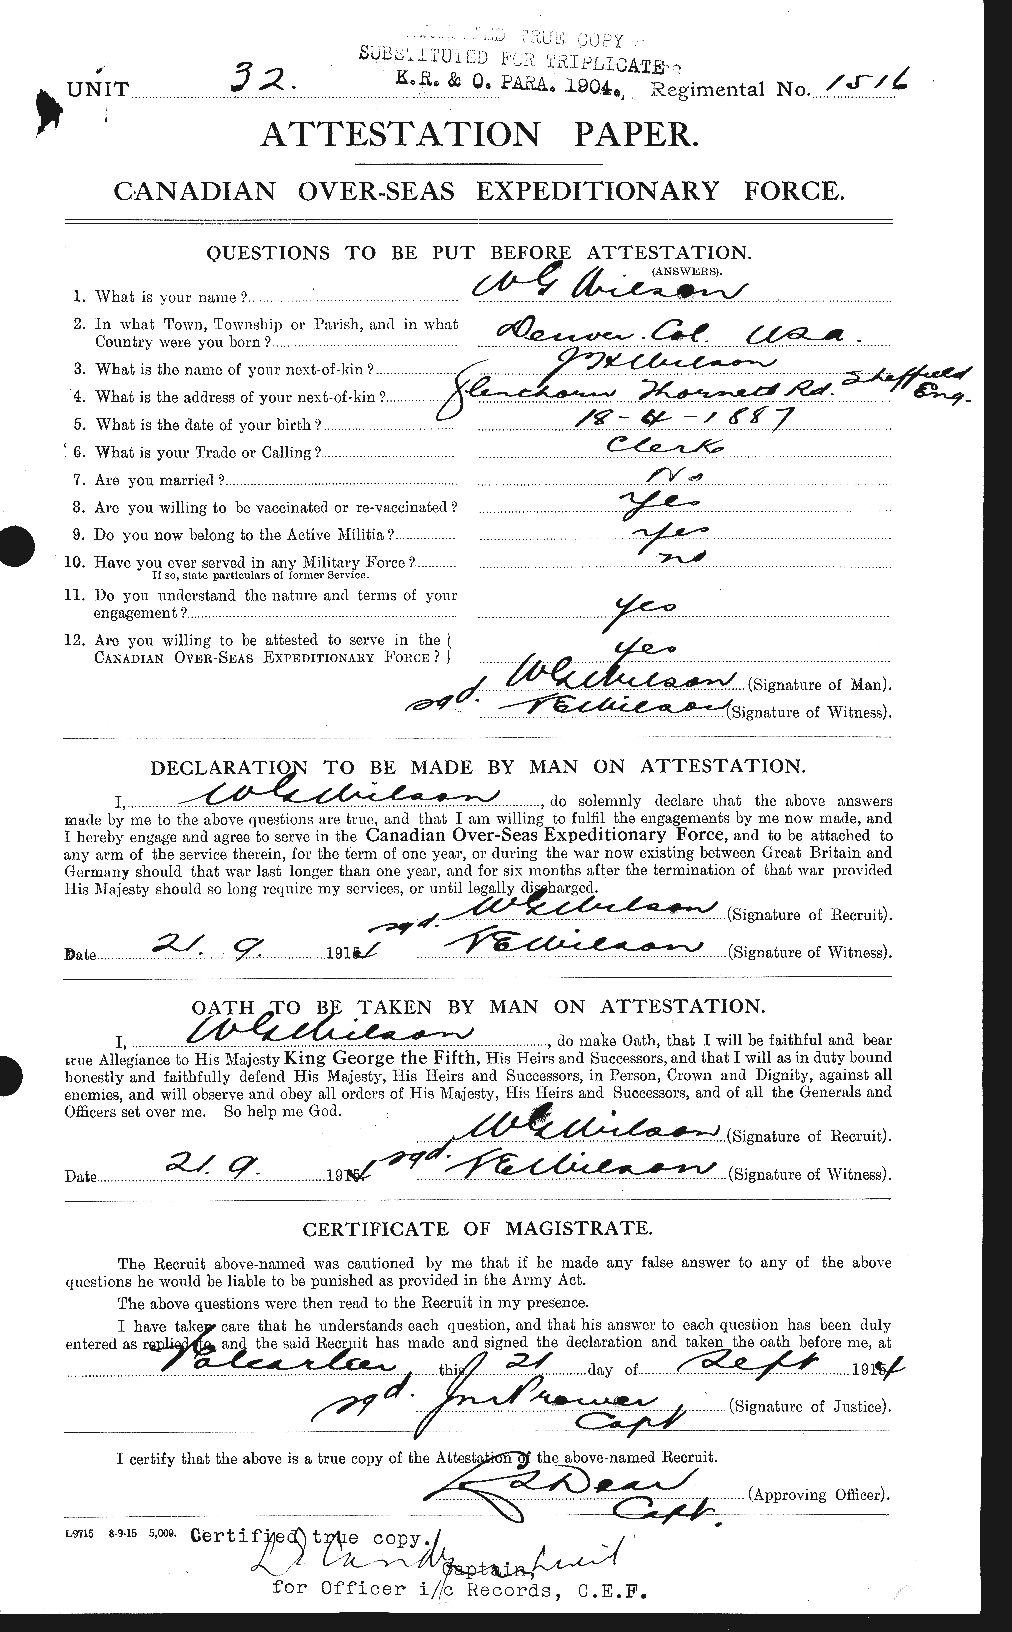 Personnel Records of the First World War - CEF 681718a